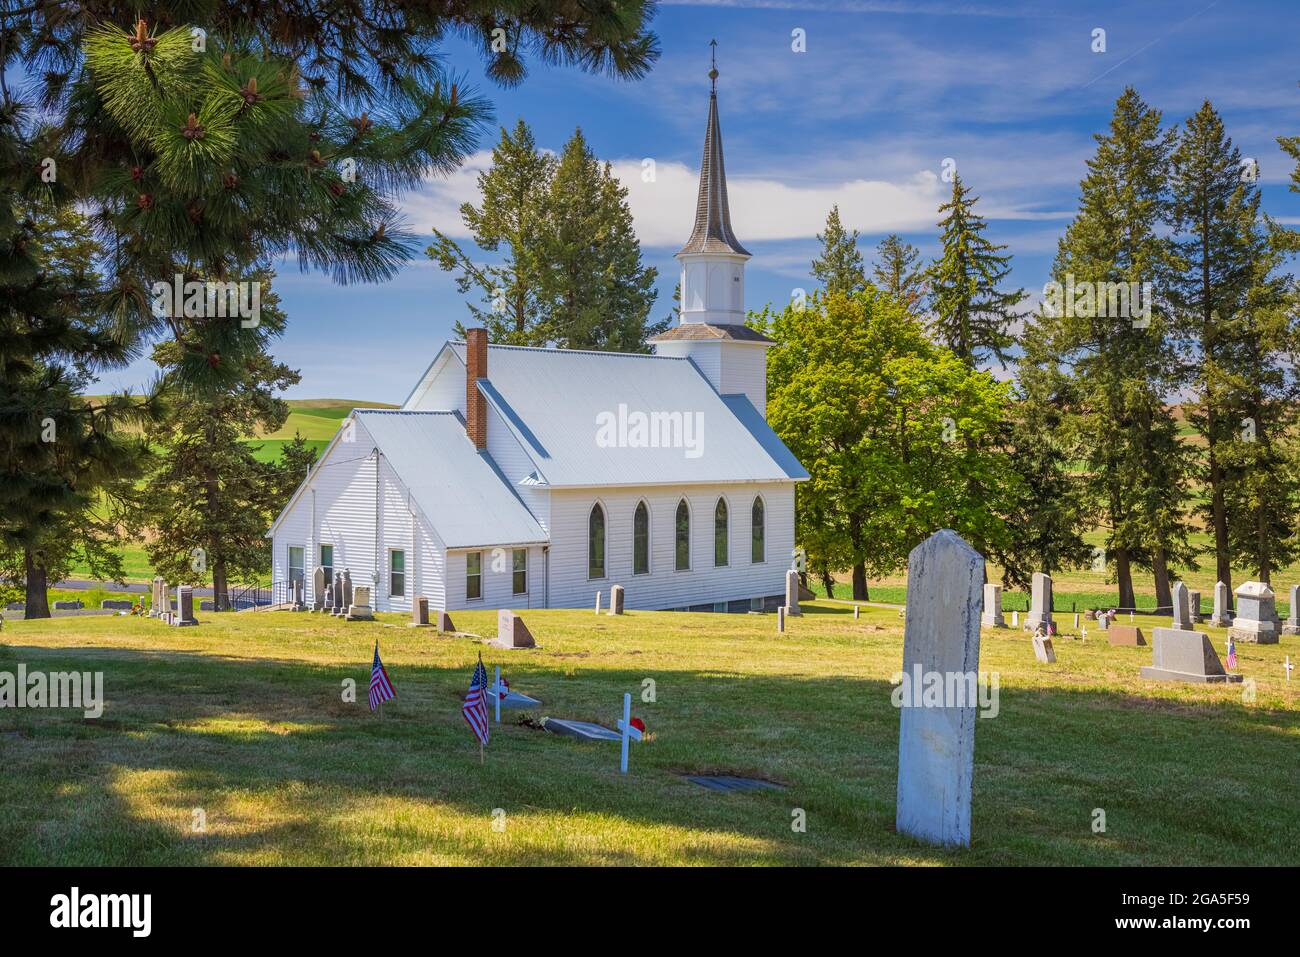 Genesee Valley Lutheran Church in Genesee, Idaho is a Christian congregation serving the Genesee community. Stock Photo